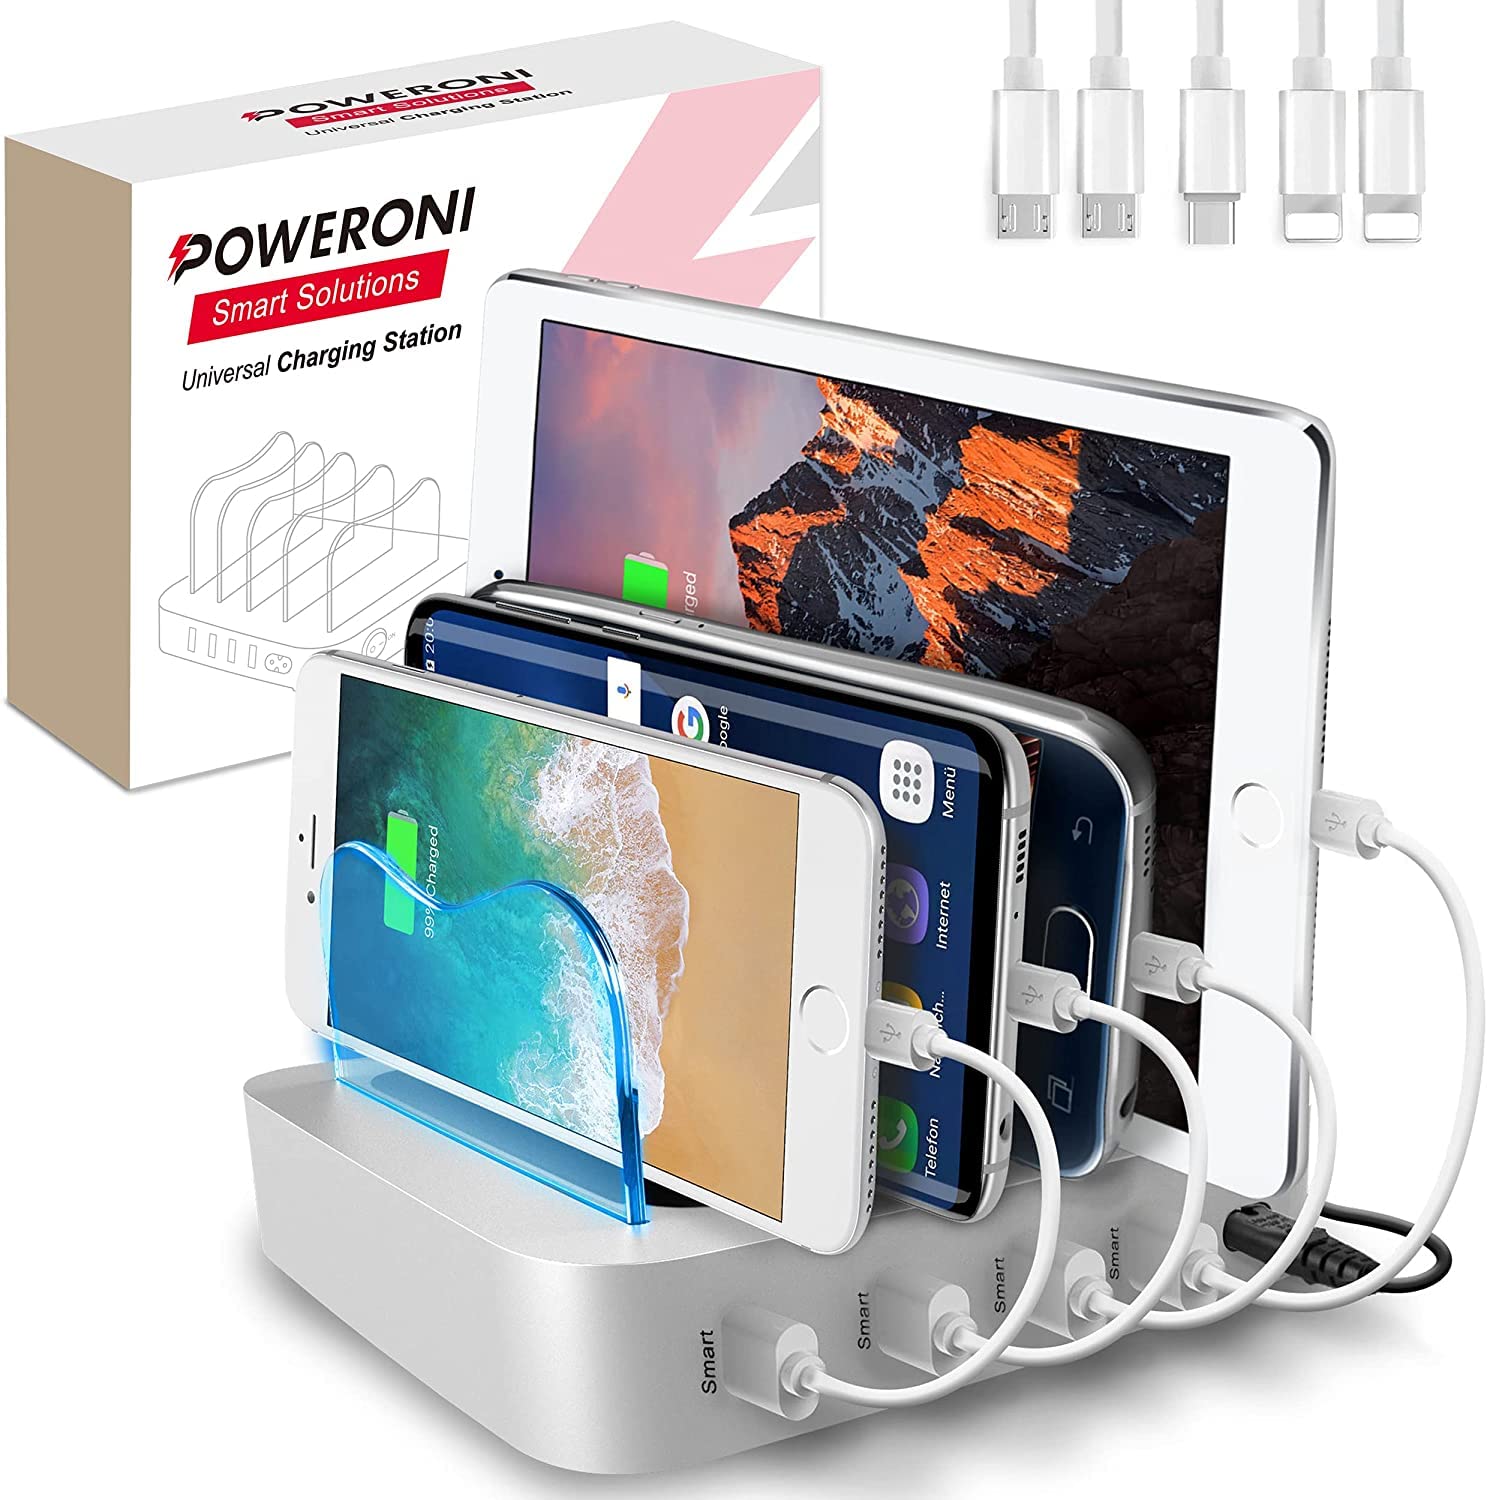 Poweroni USB Charging Dock - 4-Port - Fast Charging Station for Multiple Devices Apple - Multi Device Charger Station - Compatible with Apple iPad iPhone and Android Cell Phone and Tablet  - Acceptable